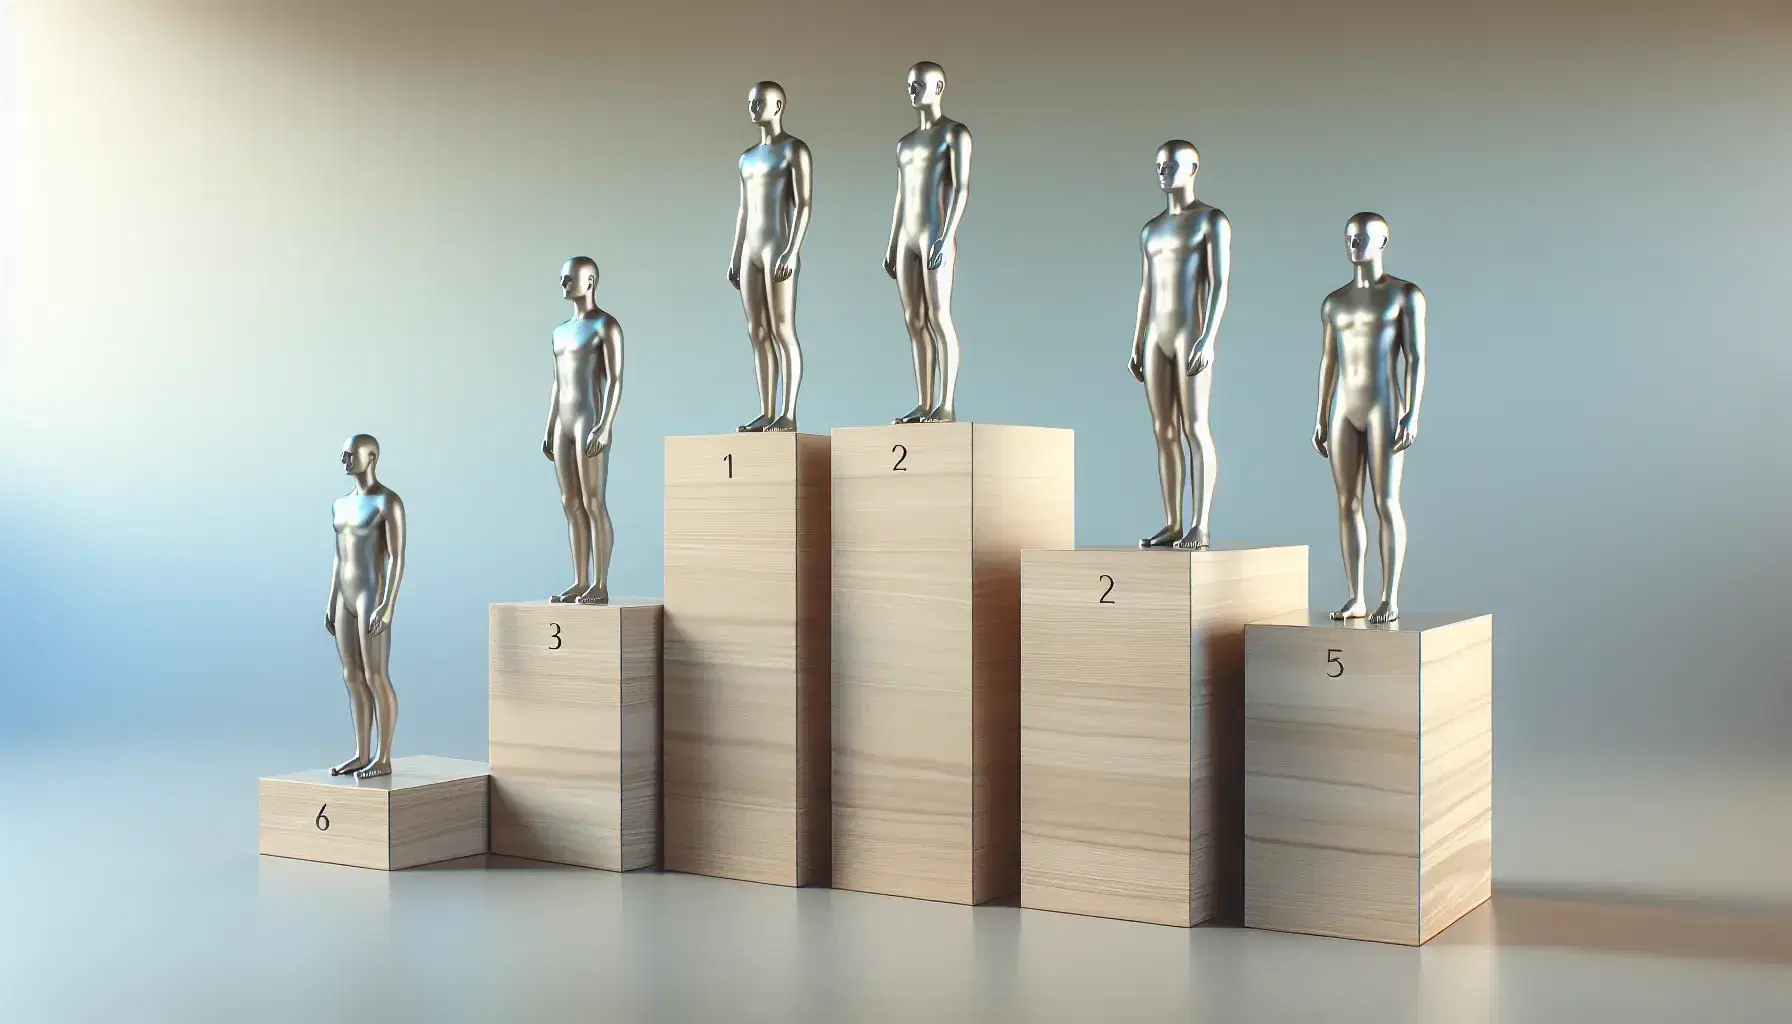 Five light wooden podiums increasing in height with silver metal human figures above, blue-white gradient background, soft shadows.